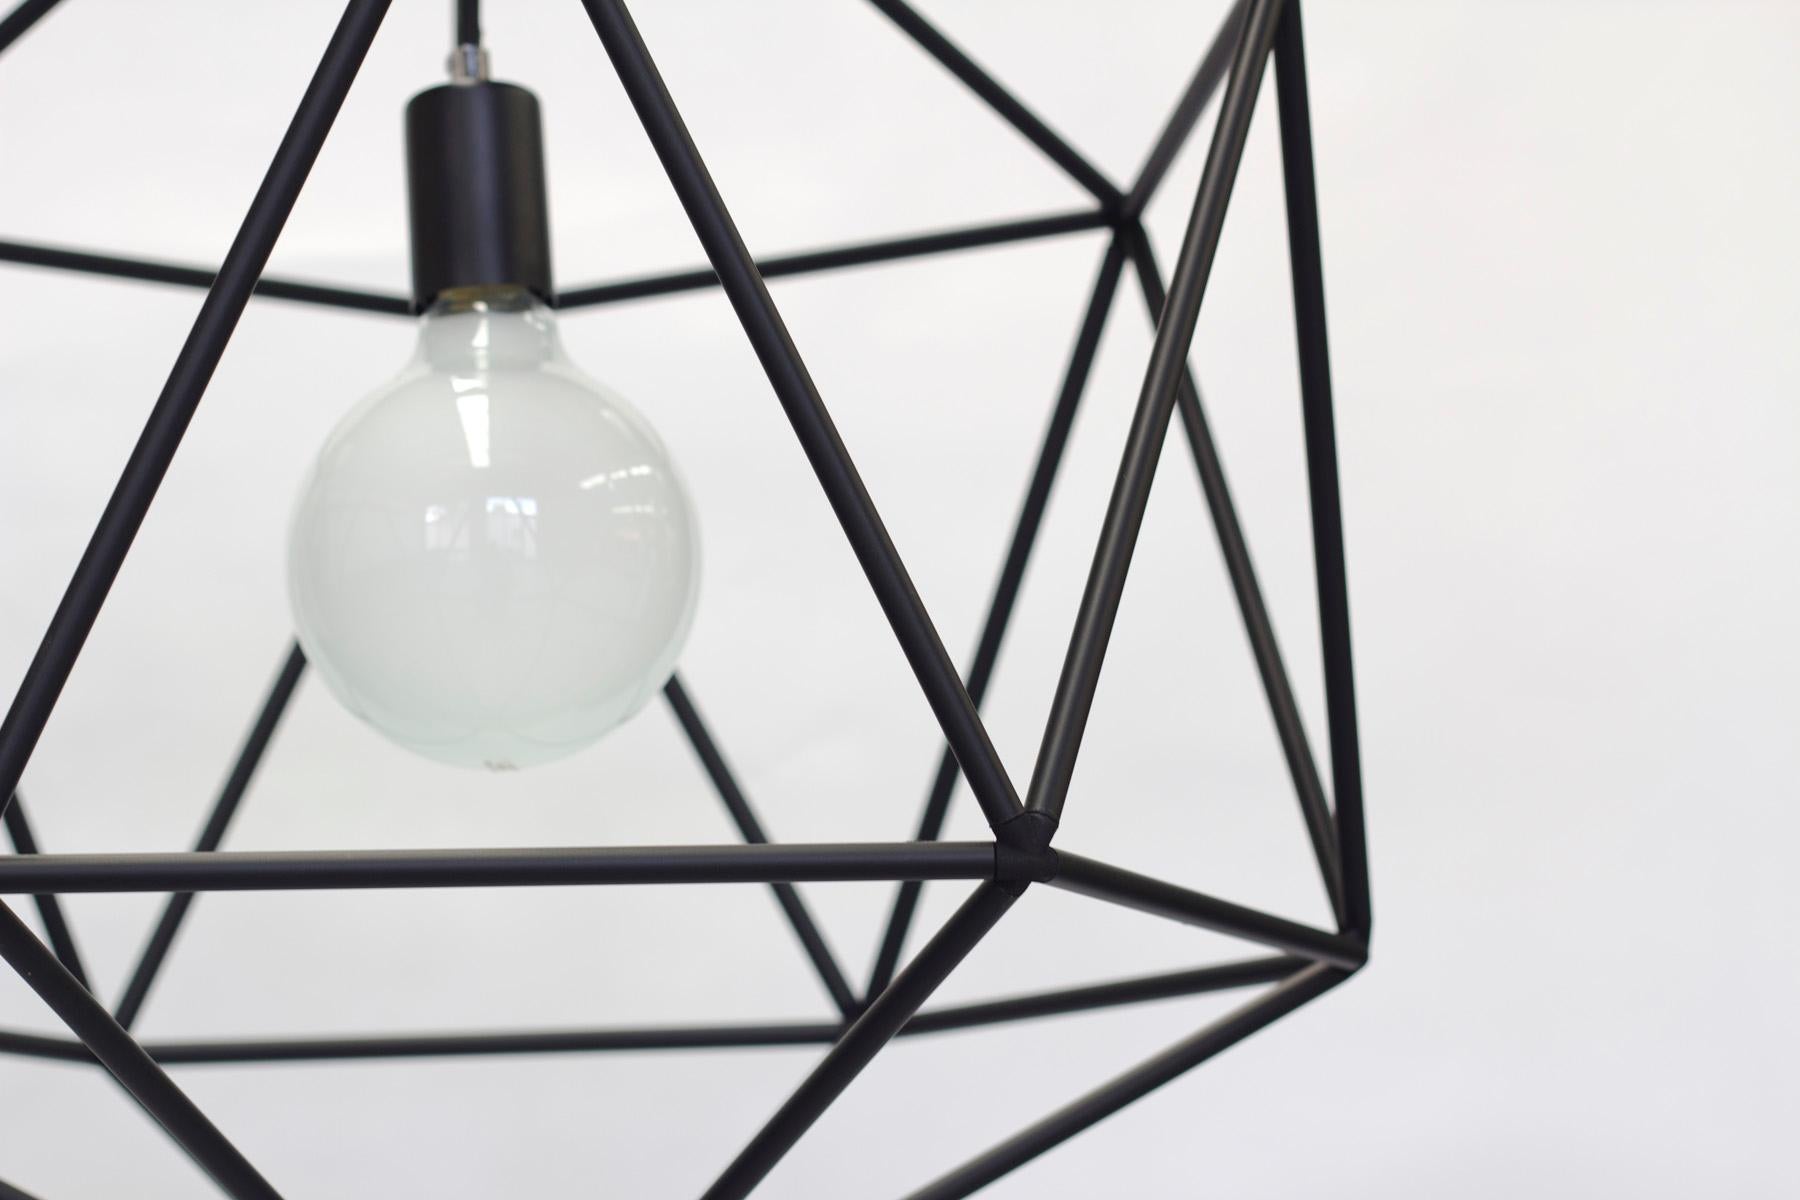 Rough diamond pendant is a decorative fixture that combines handmade craftsmanship with digital technology. The design combines a 3D printed joining system with handcut and assembled copper or brass tube. The result is a decorative feature light